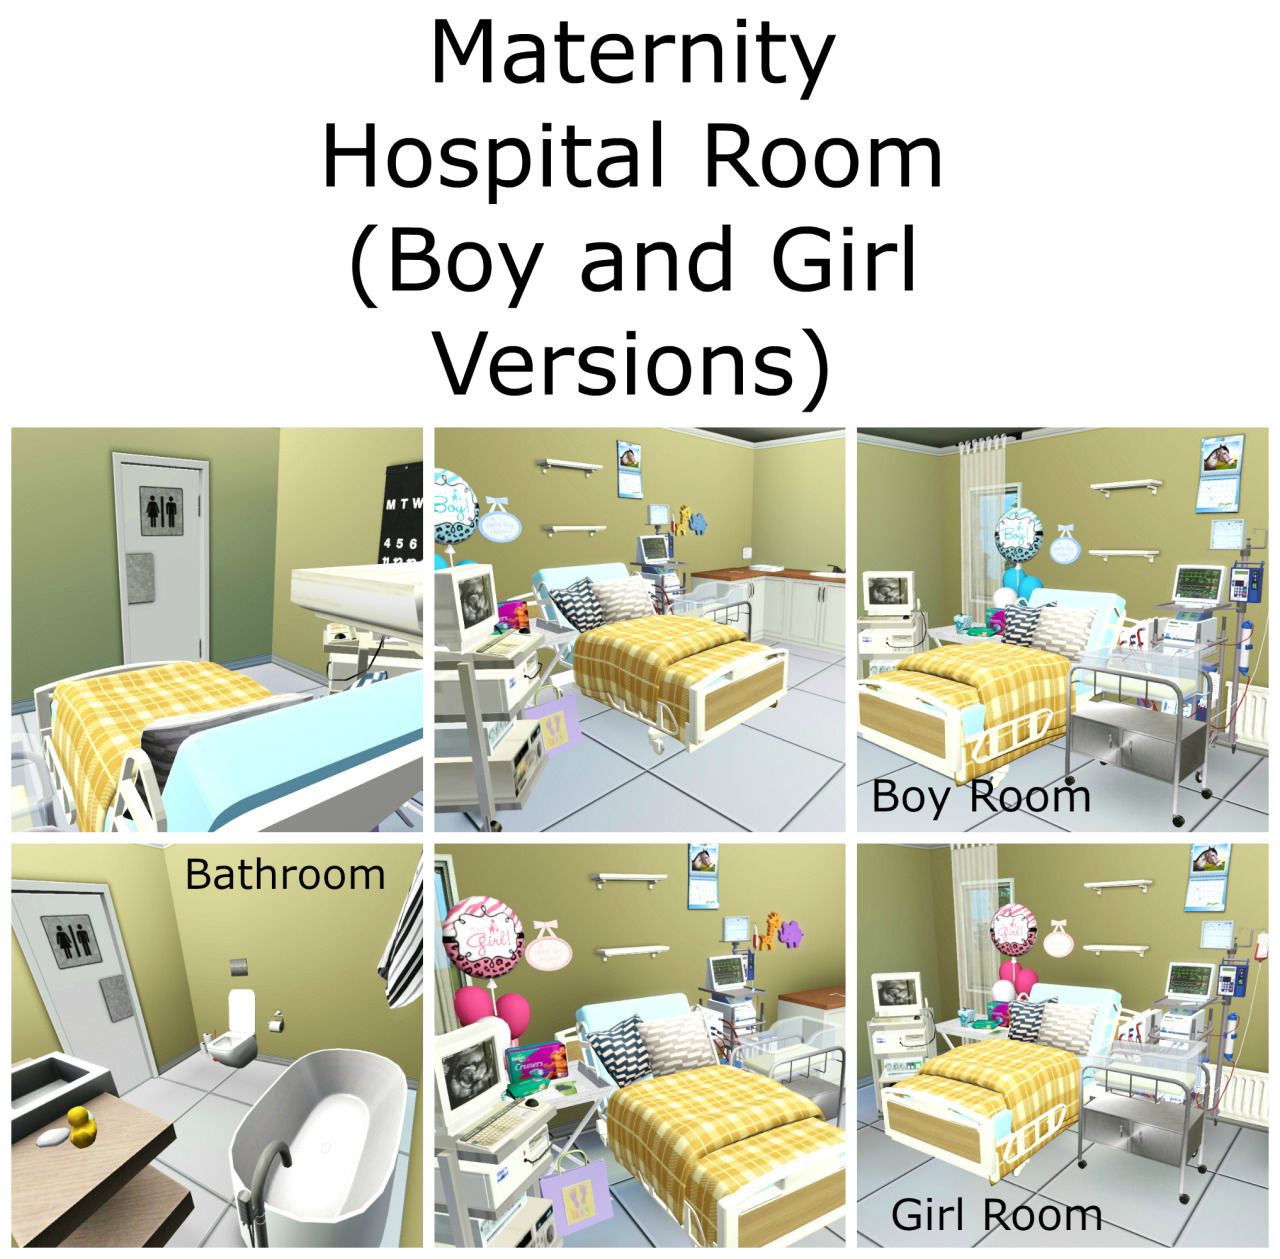 the sims 3 baby mods